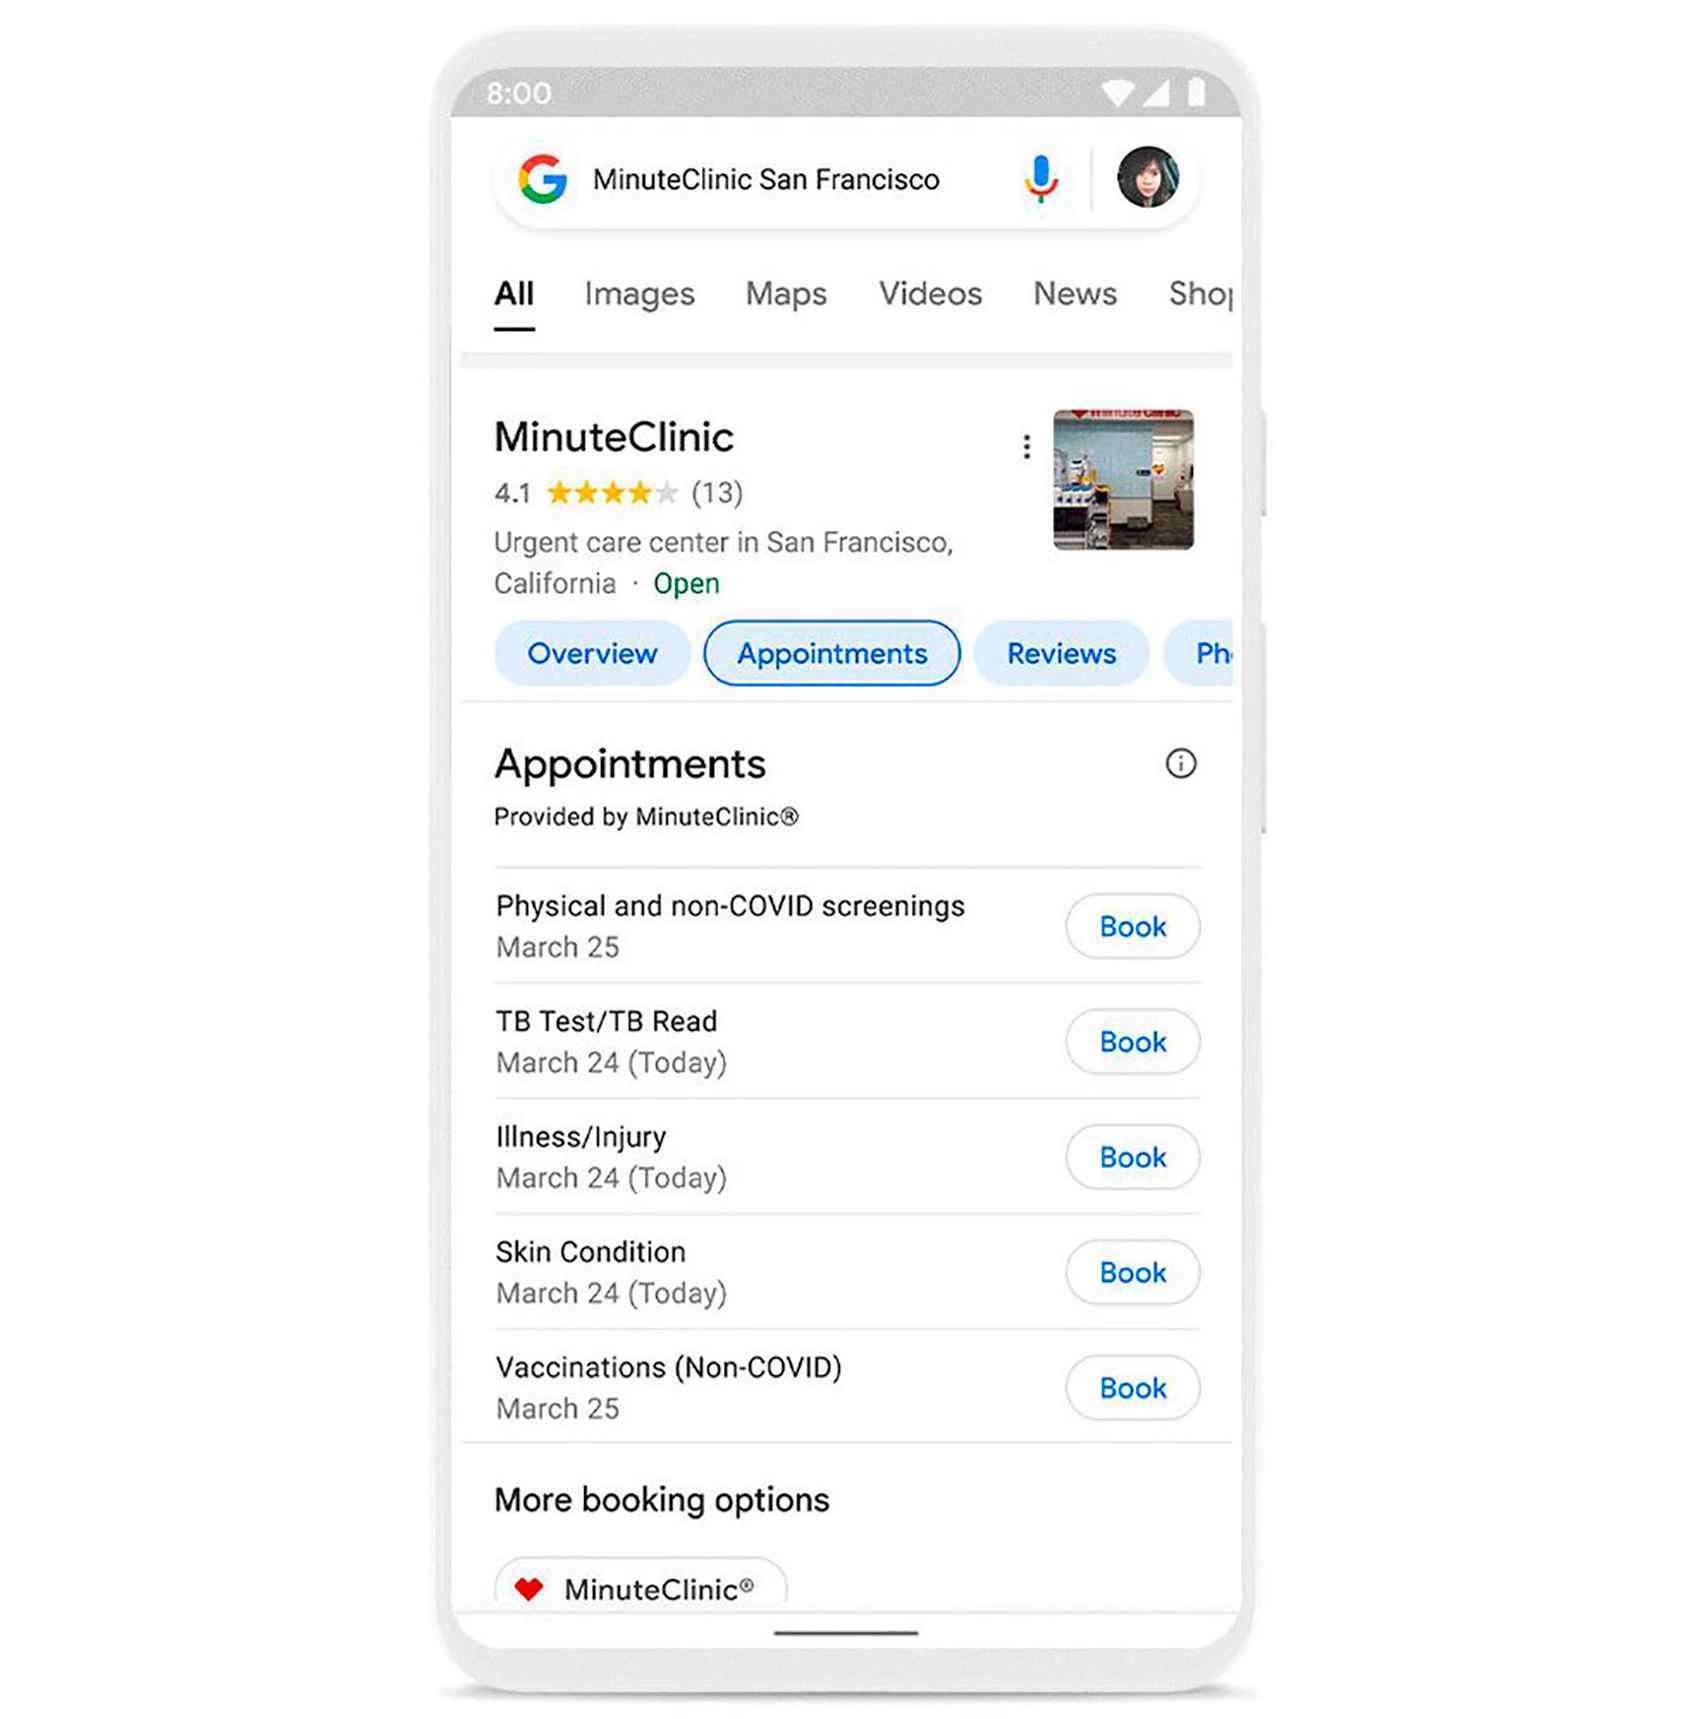 This is the first phase of the Google search engine to make an appointment